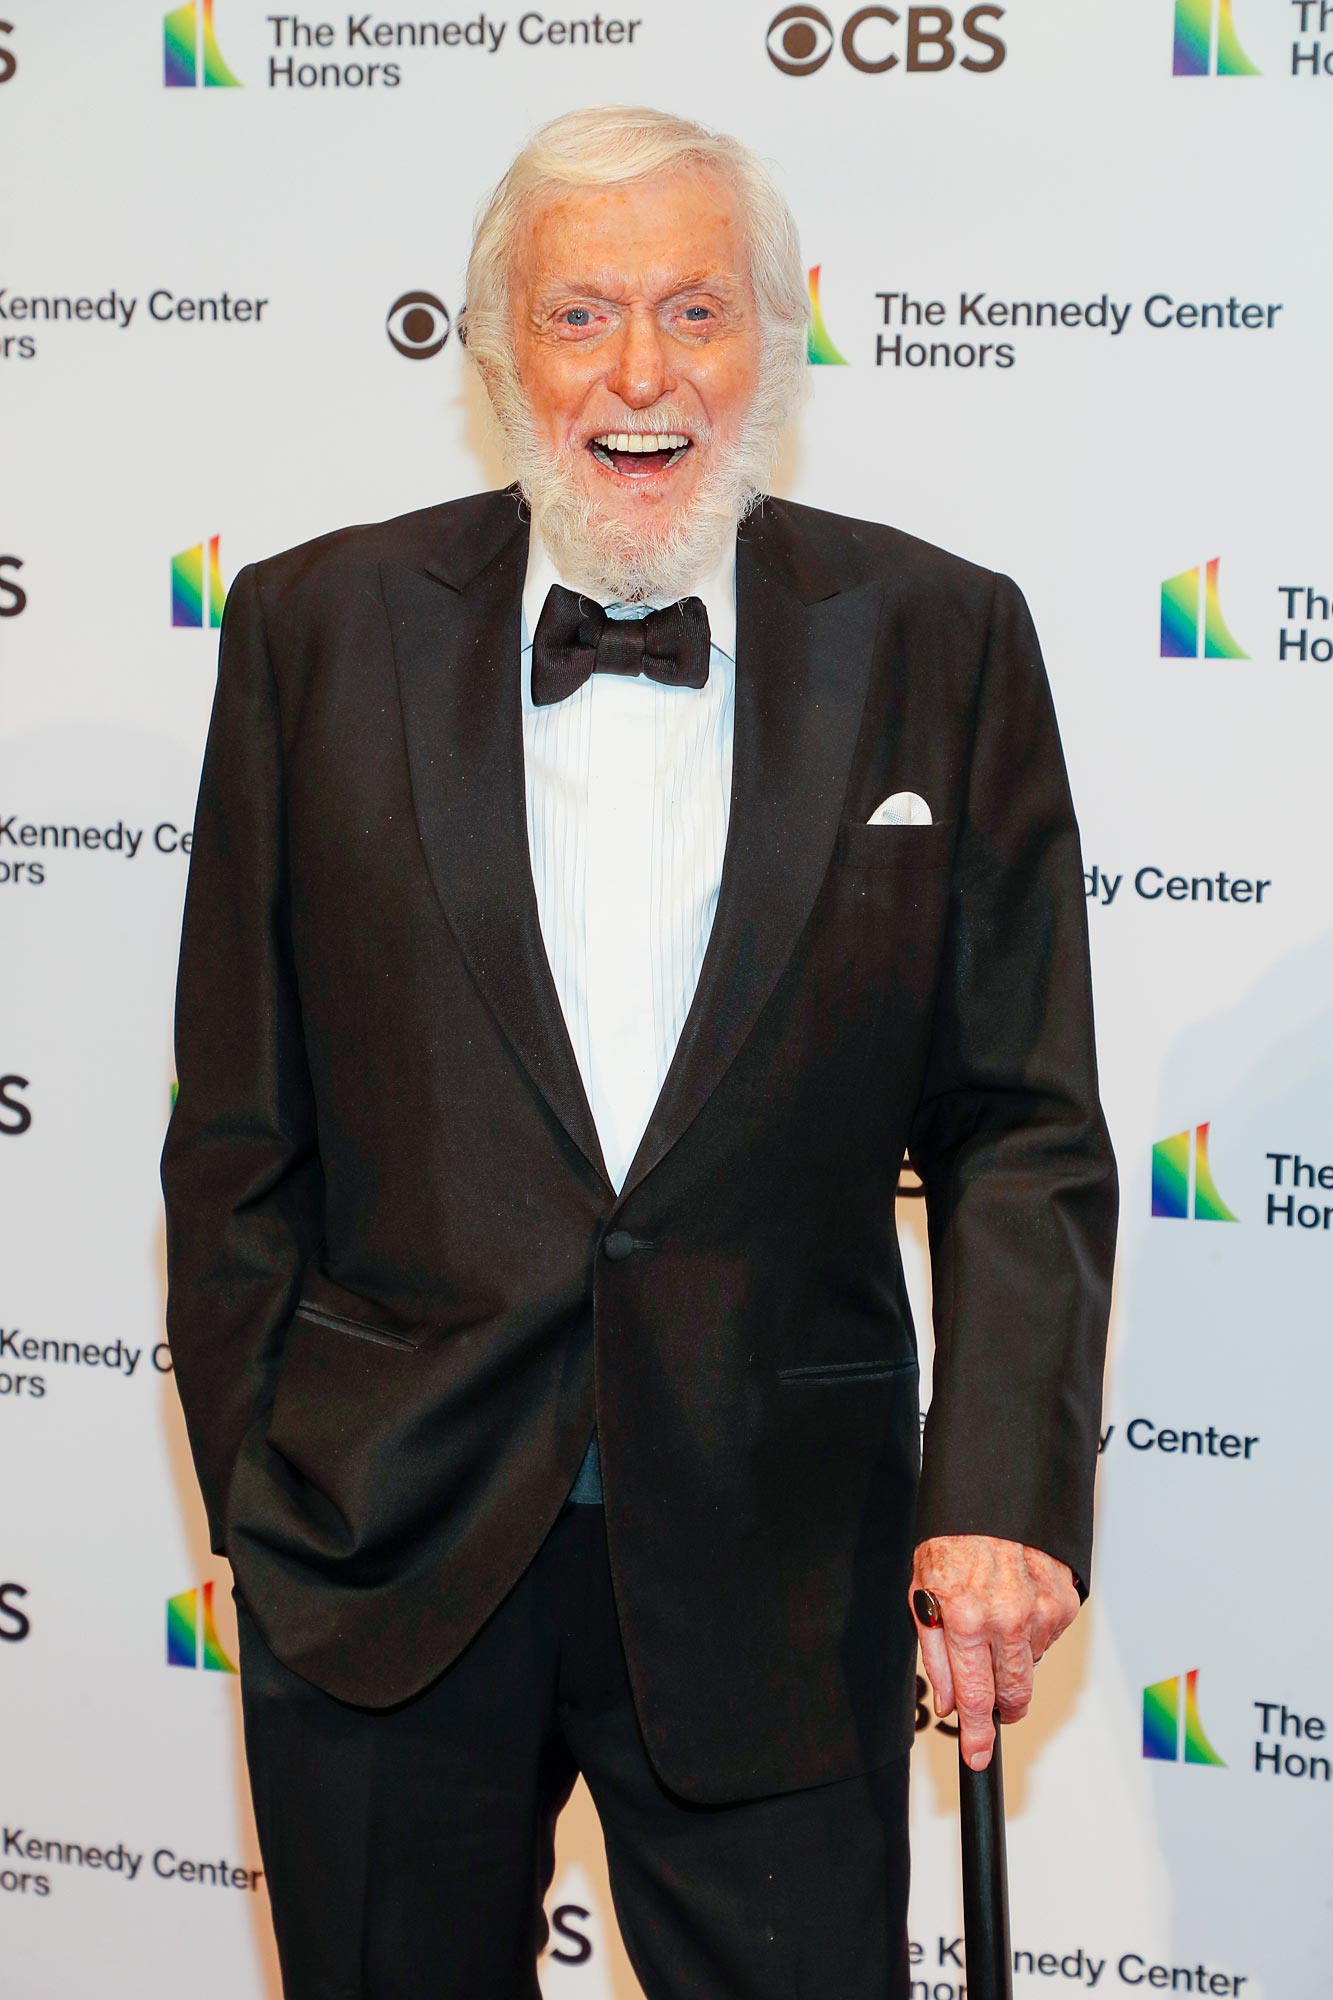 Dick Van Dyke Makes History for Daytime Emmy Nomination at Age 98